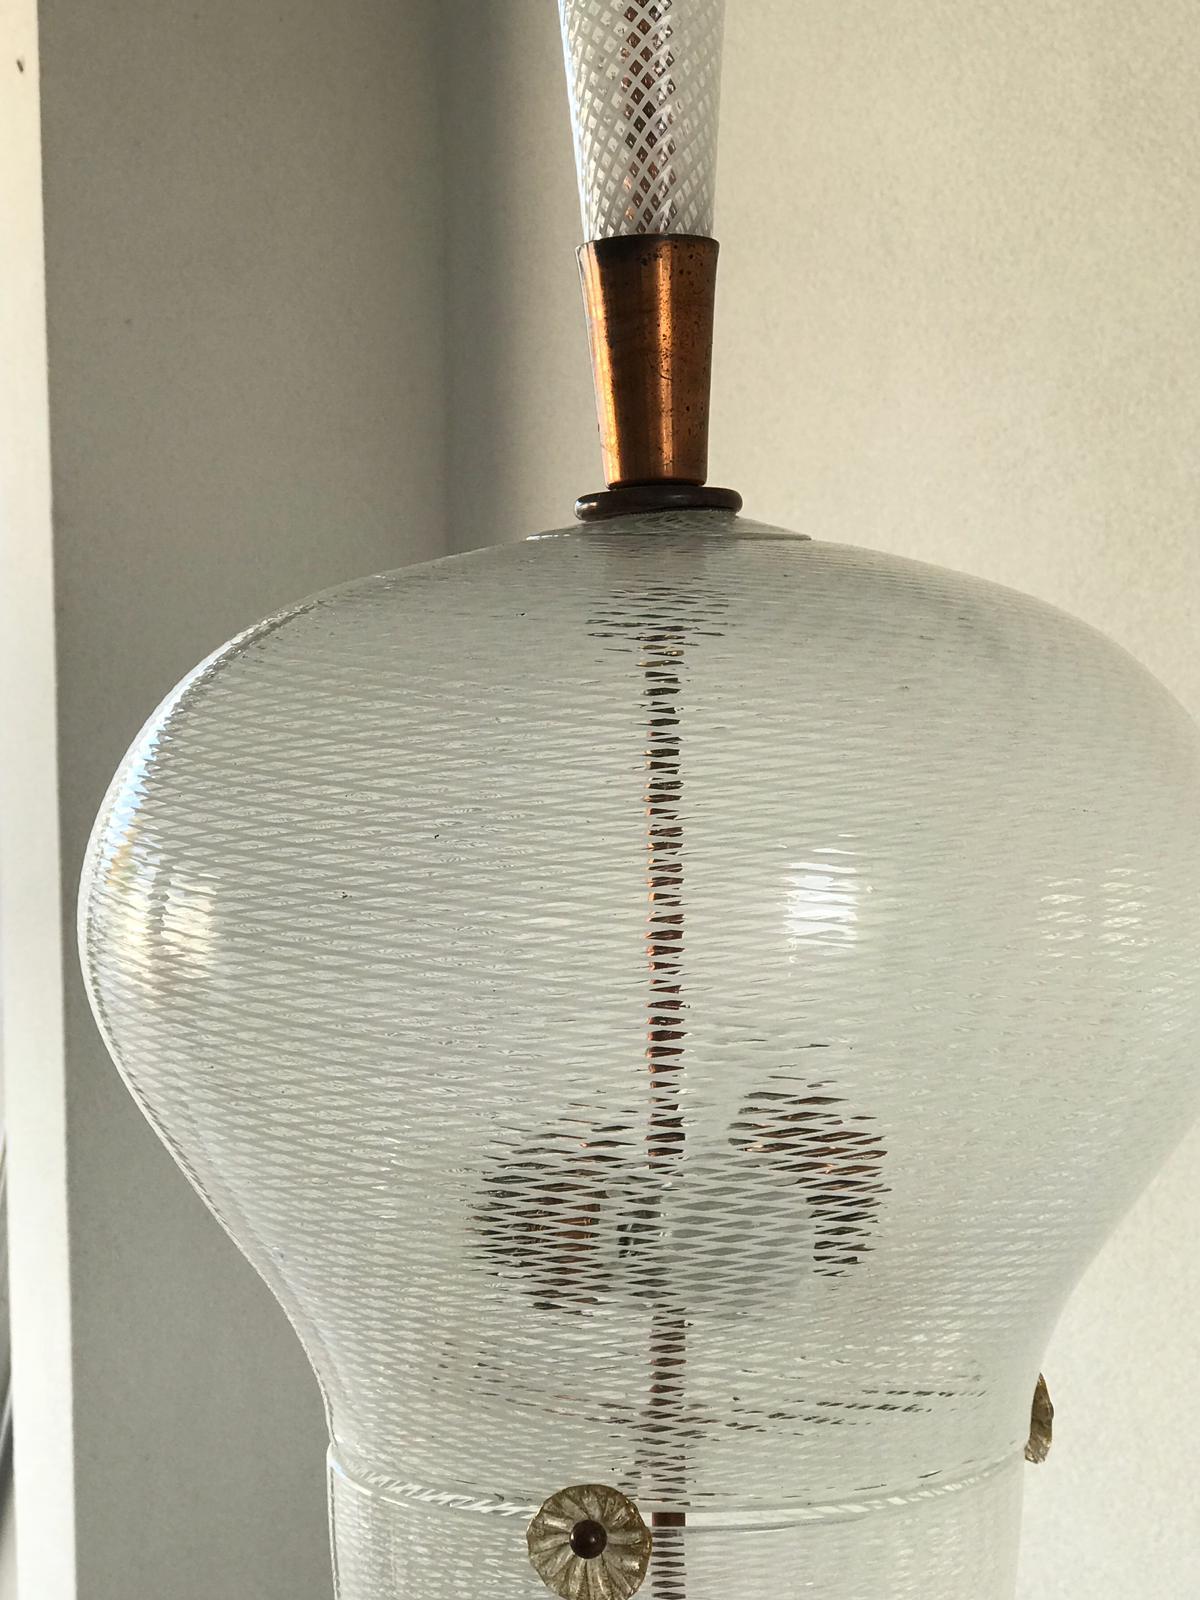 Handblown glass sphere and conical shaft attributed to Carlo Scarpa for Venini. Amazing execution in Reticello glass.